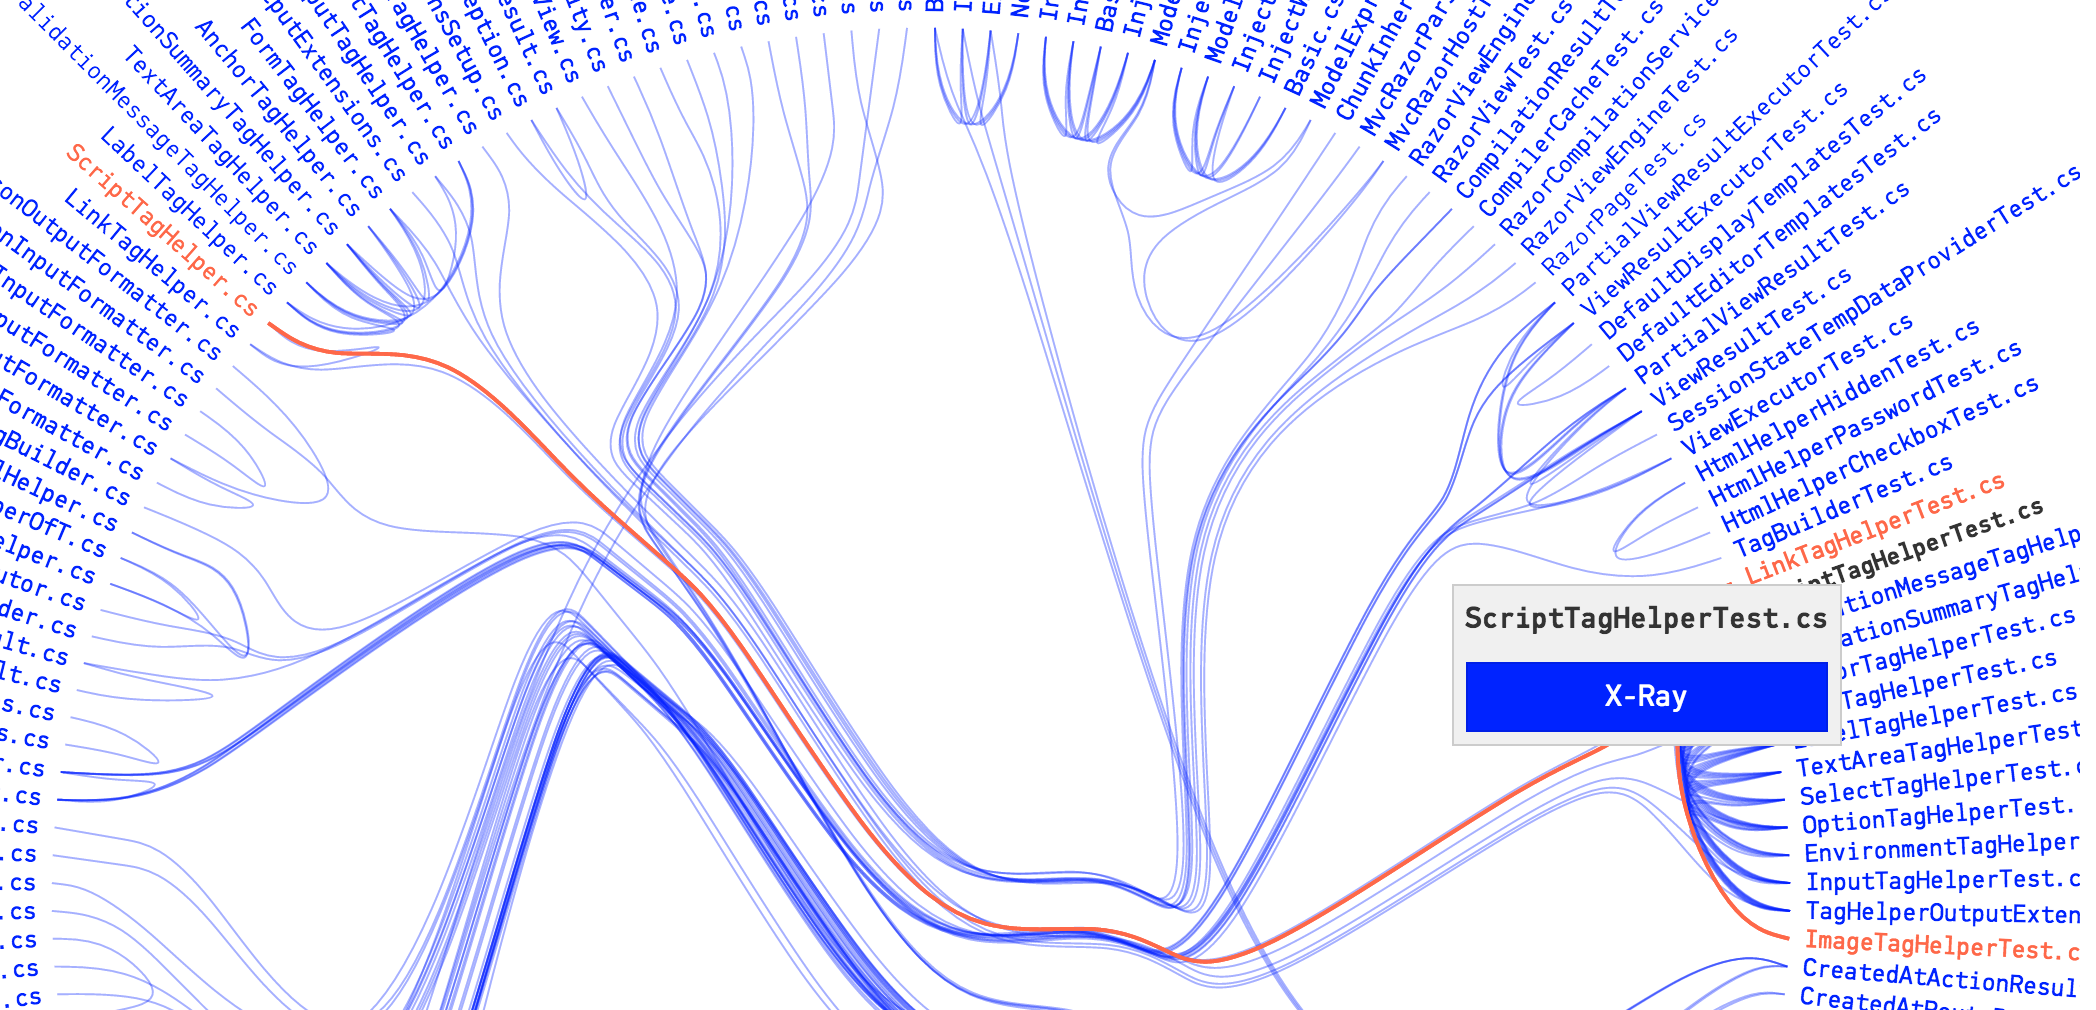 Invoke X-Ray by using the context menu in a temporal coupling visualization.